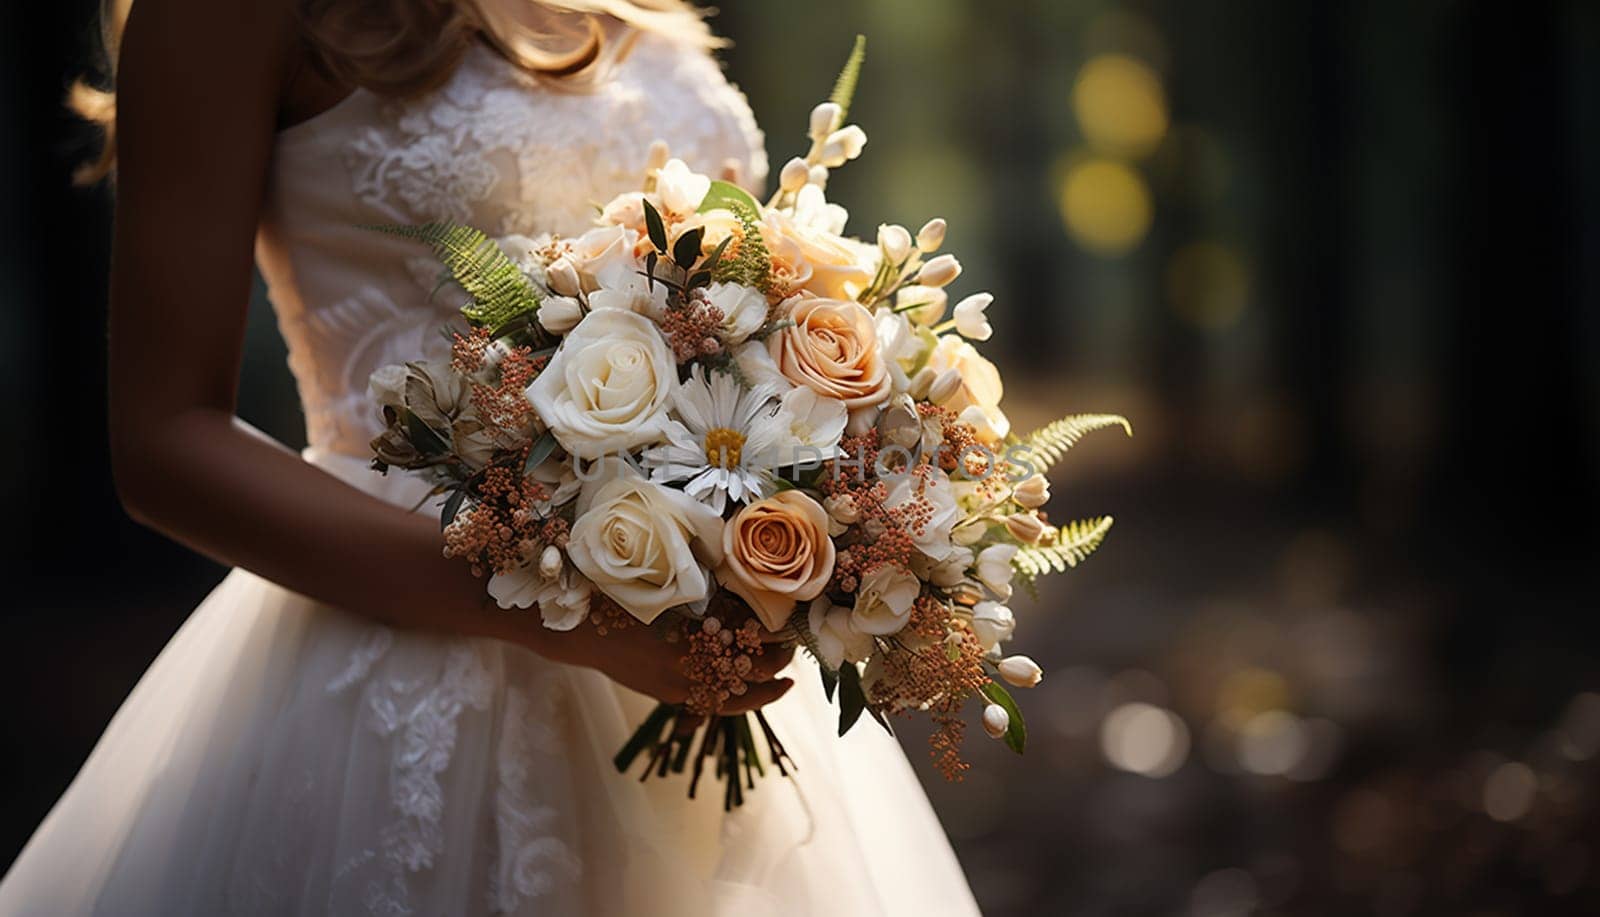 Stylish bride bouquet elegant. A beautiful wedding bouquet with orange roses in bride's hands. A woman in wedding dress holding flowers. Celebration style concept. Design element. Close up. Copy space. space for text